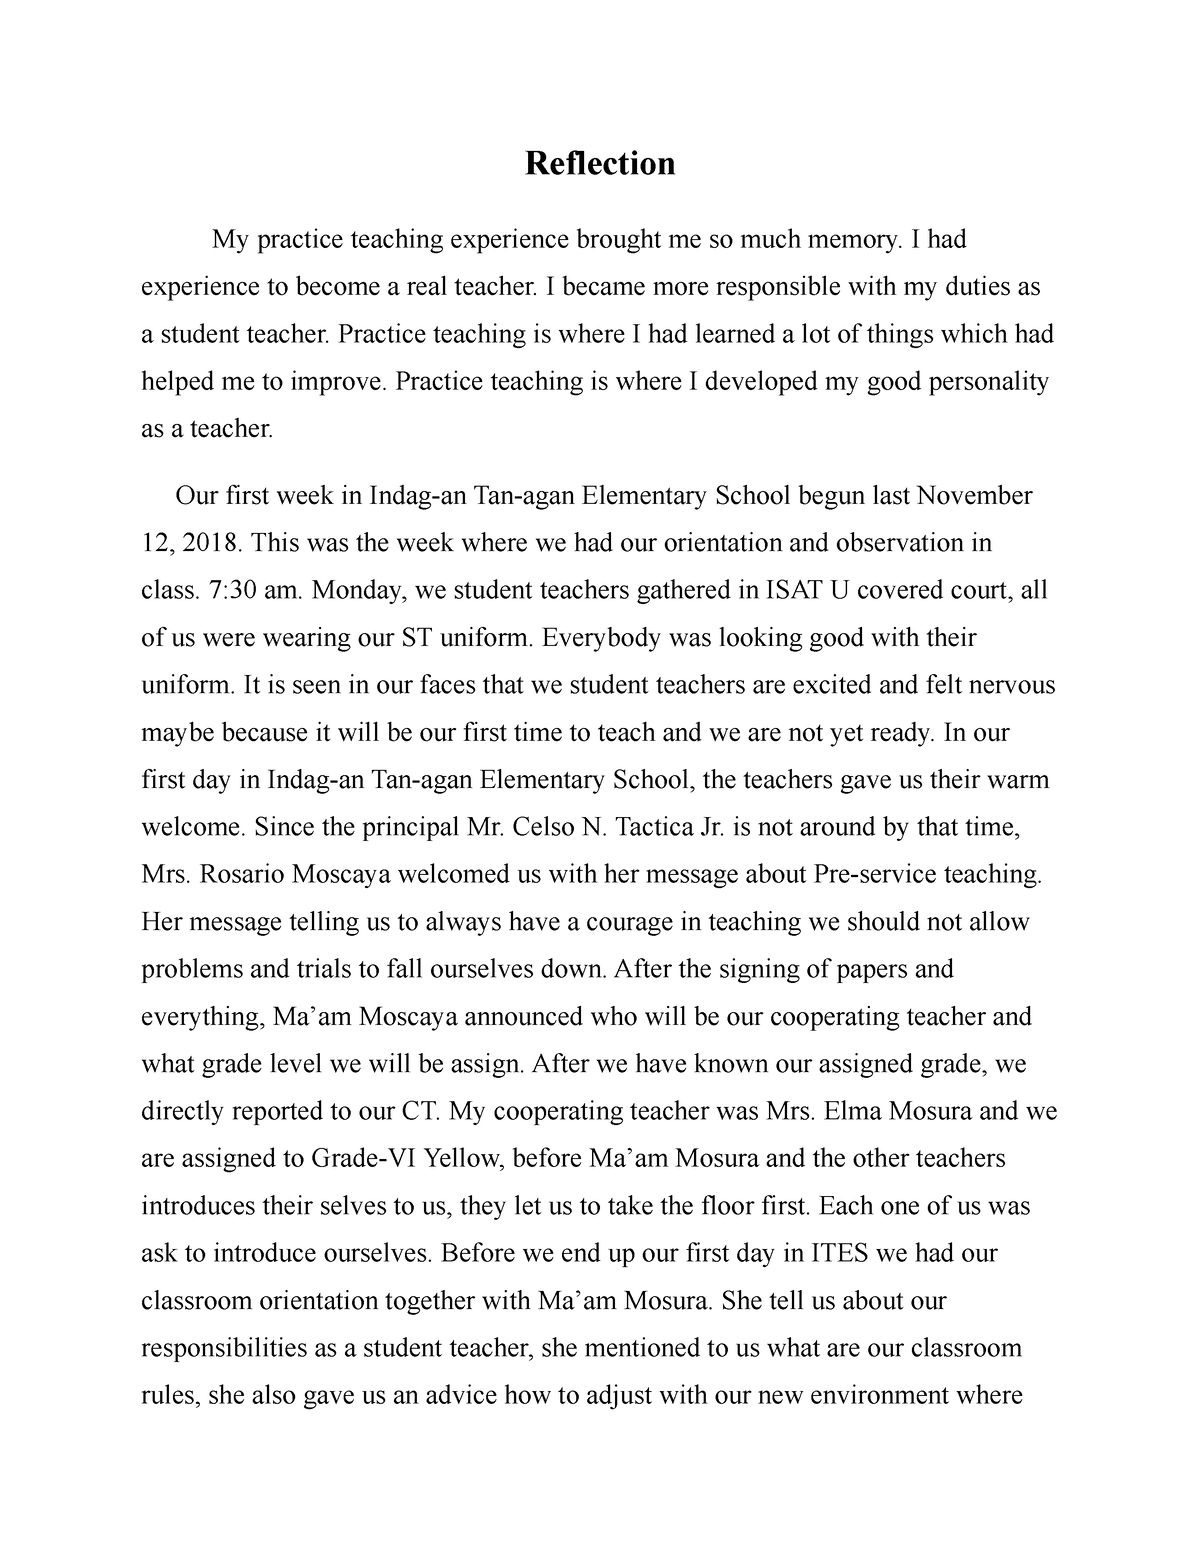 reflection essay on teaching practice